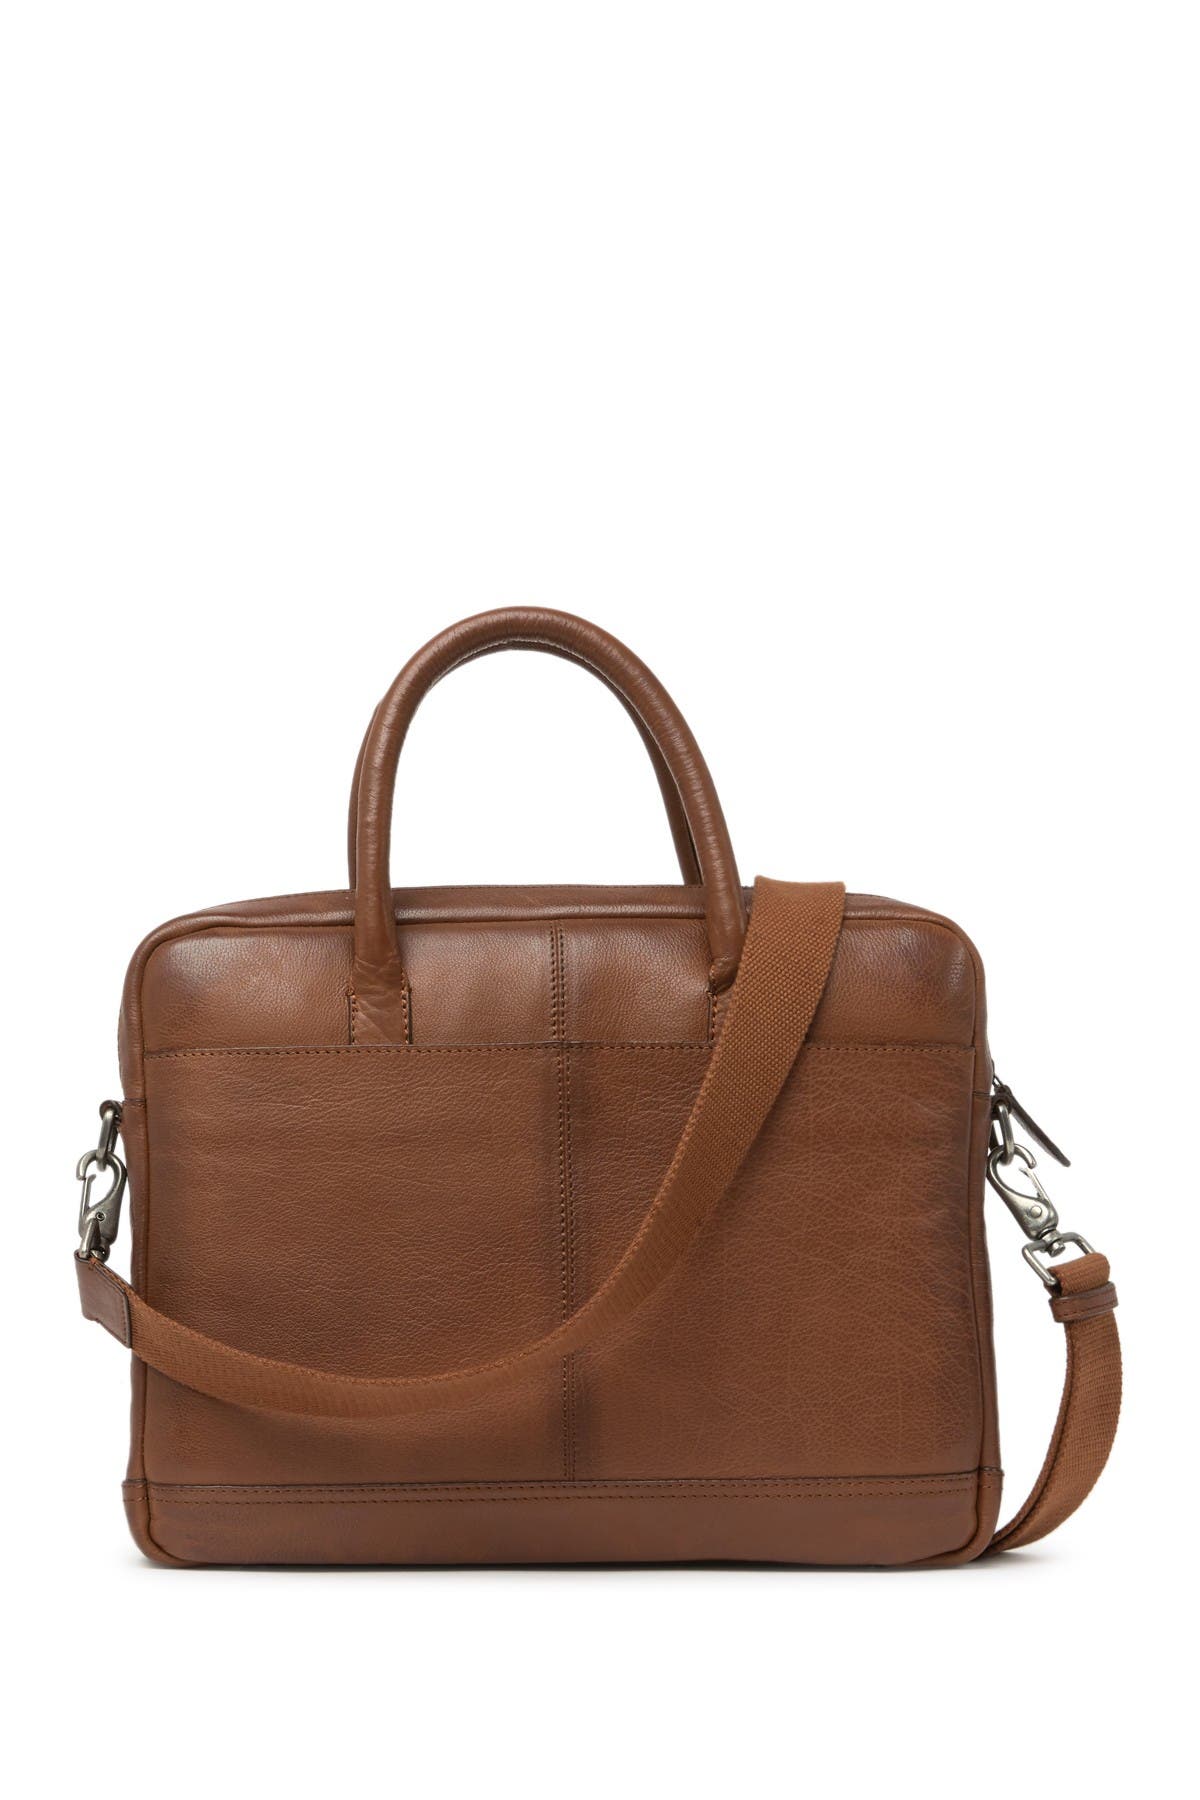 Frye Leather Briefcase In Natural